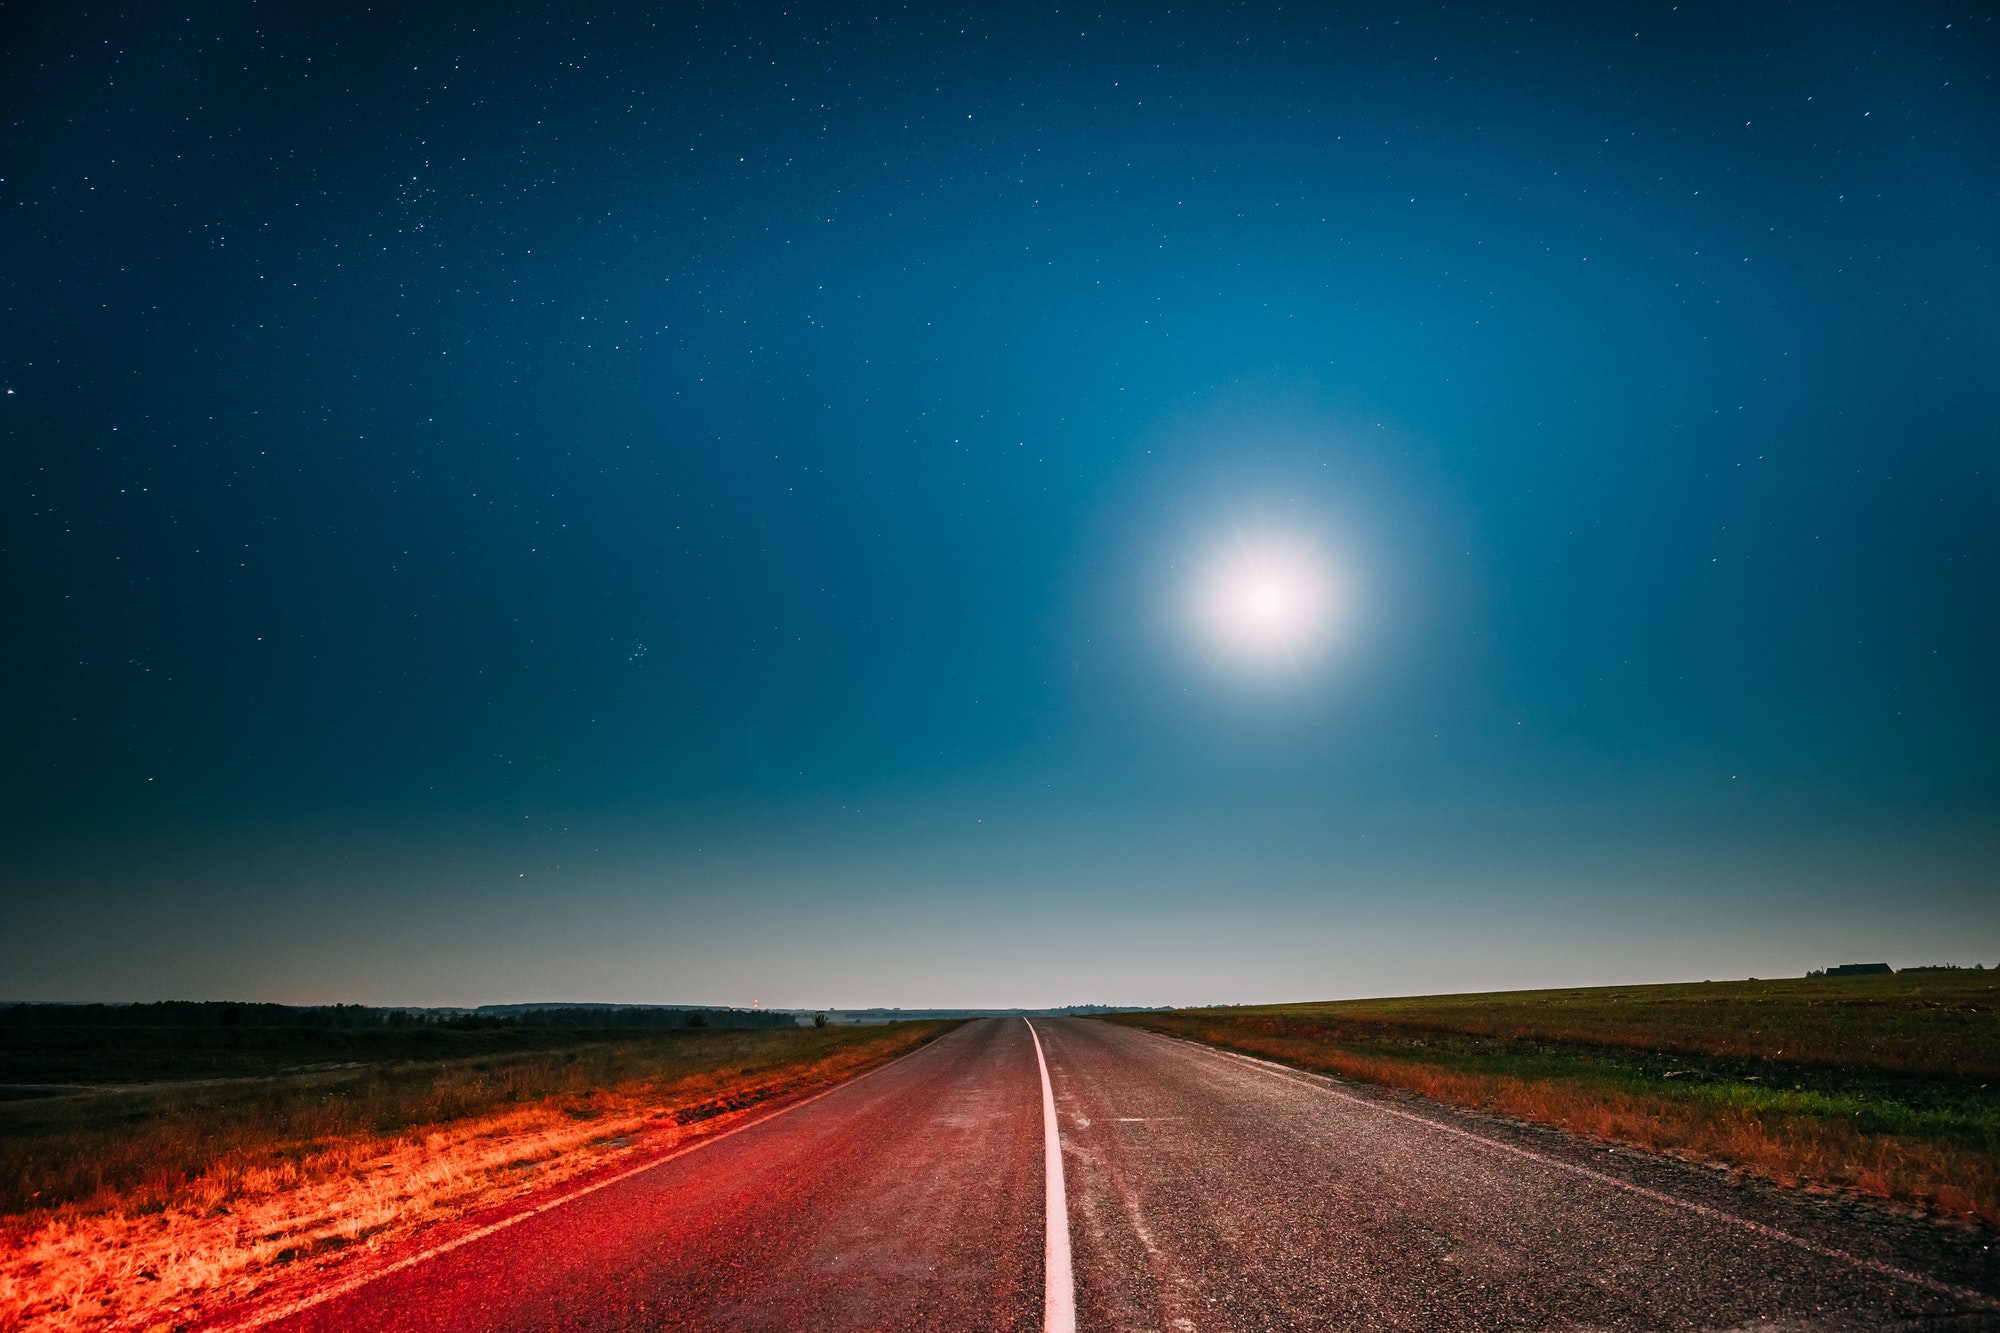 Night Starry Sky With Moon Above Country Asphalt Road In Country